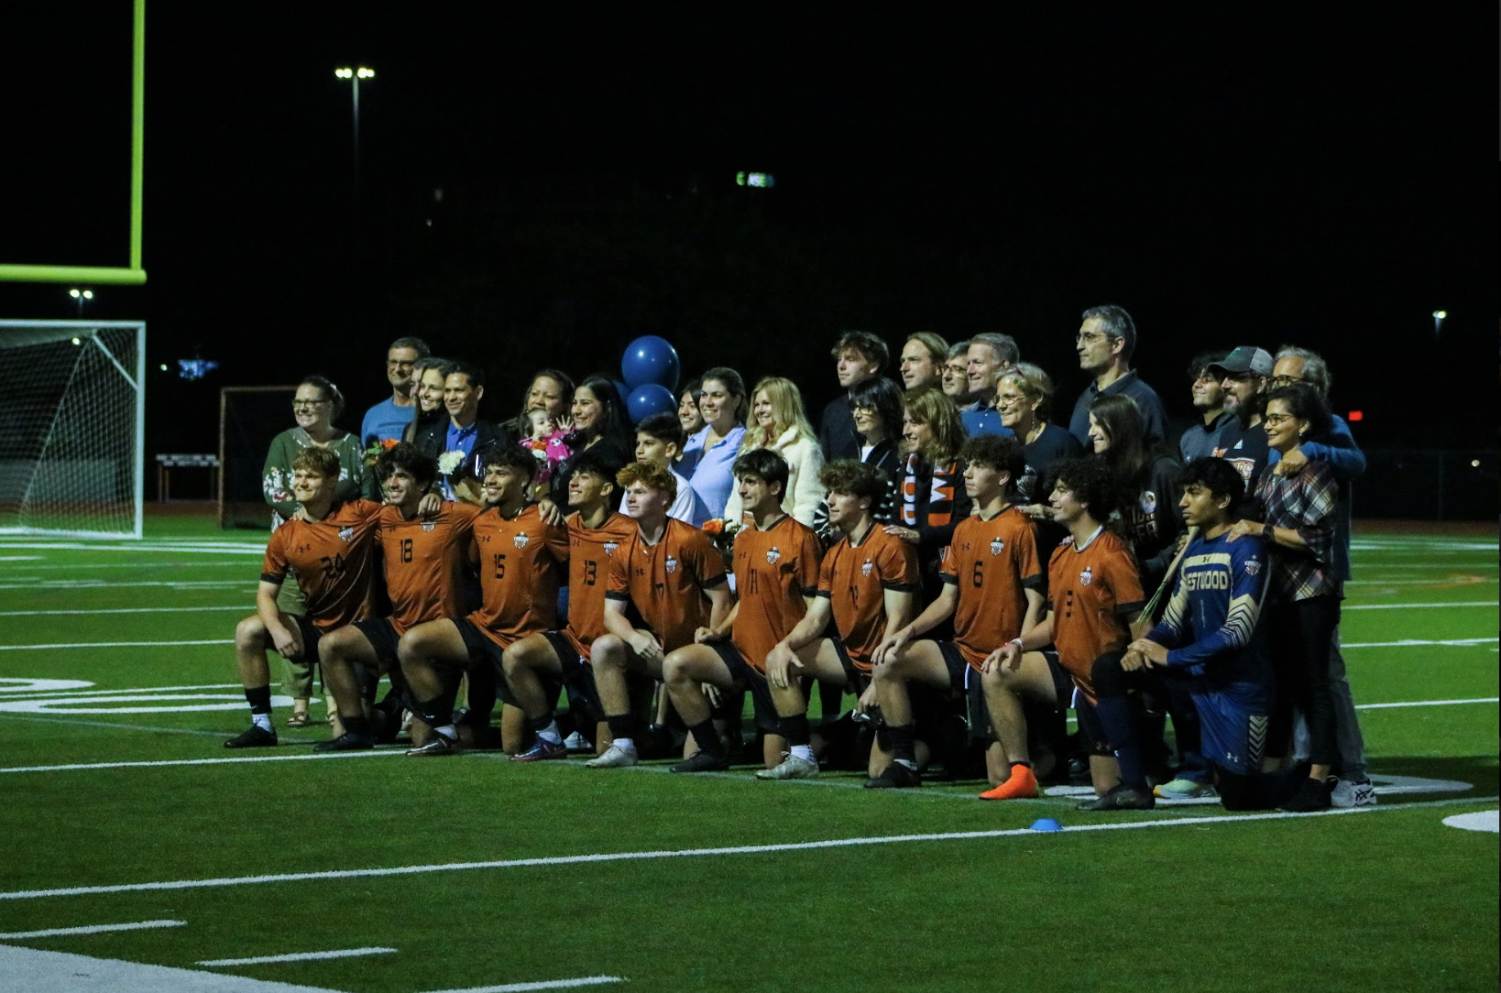 %5BGALLERY%5D%3A+Varsity+Mens+Soccer+Clinches+District+Champion+Title+Following+1-0+Win+Against+Vipers